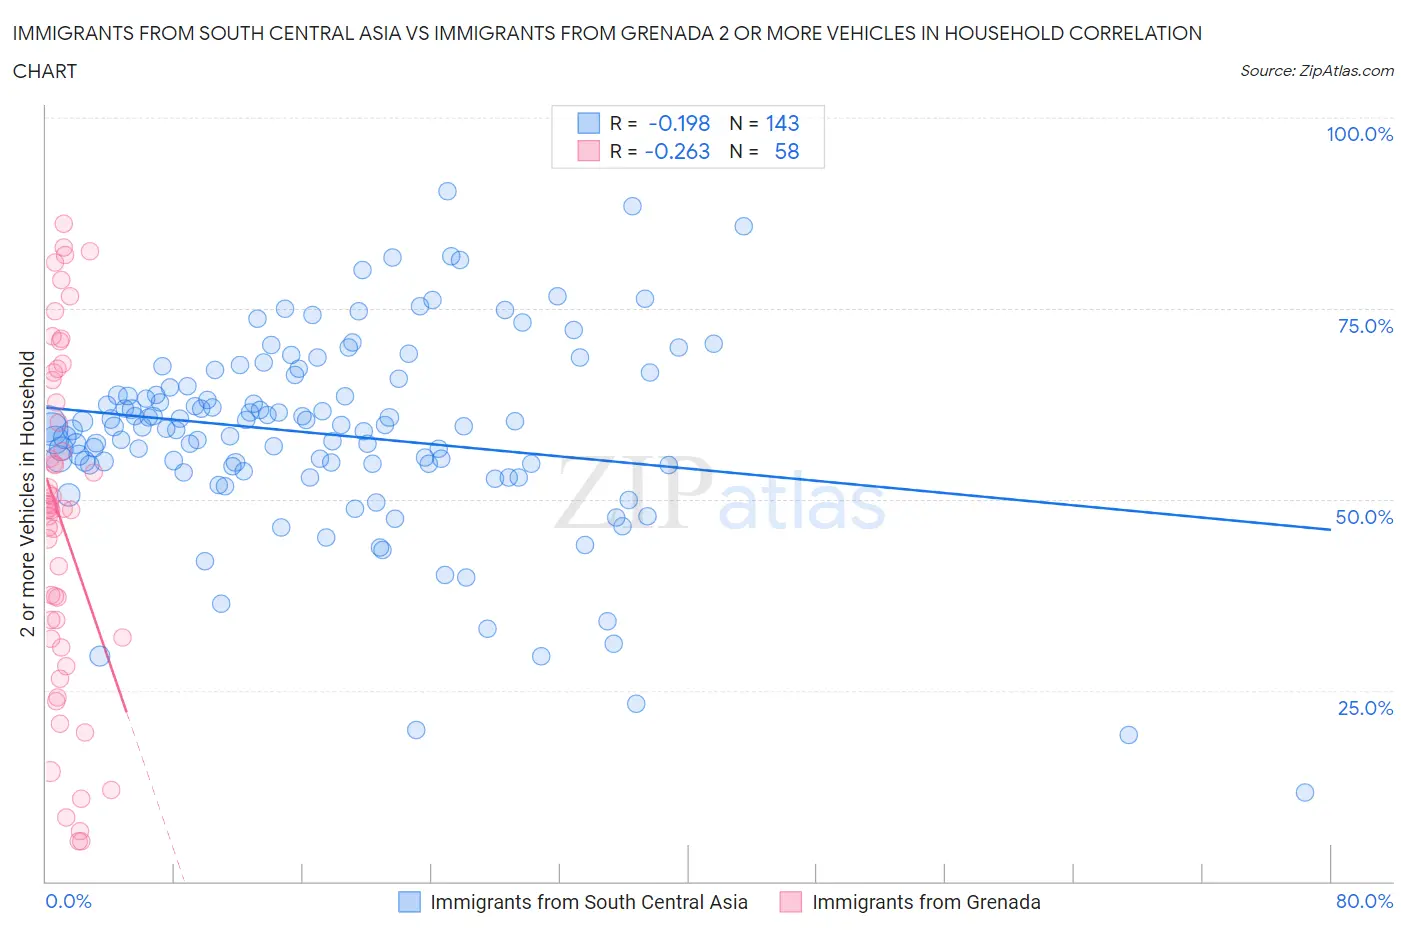 Immigrants from South Central Asia vs Immigrants from Grenada 2 or more Vehicles in Household